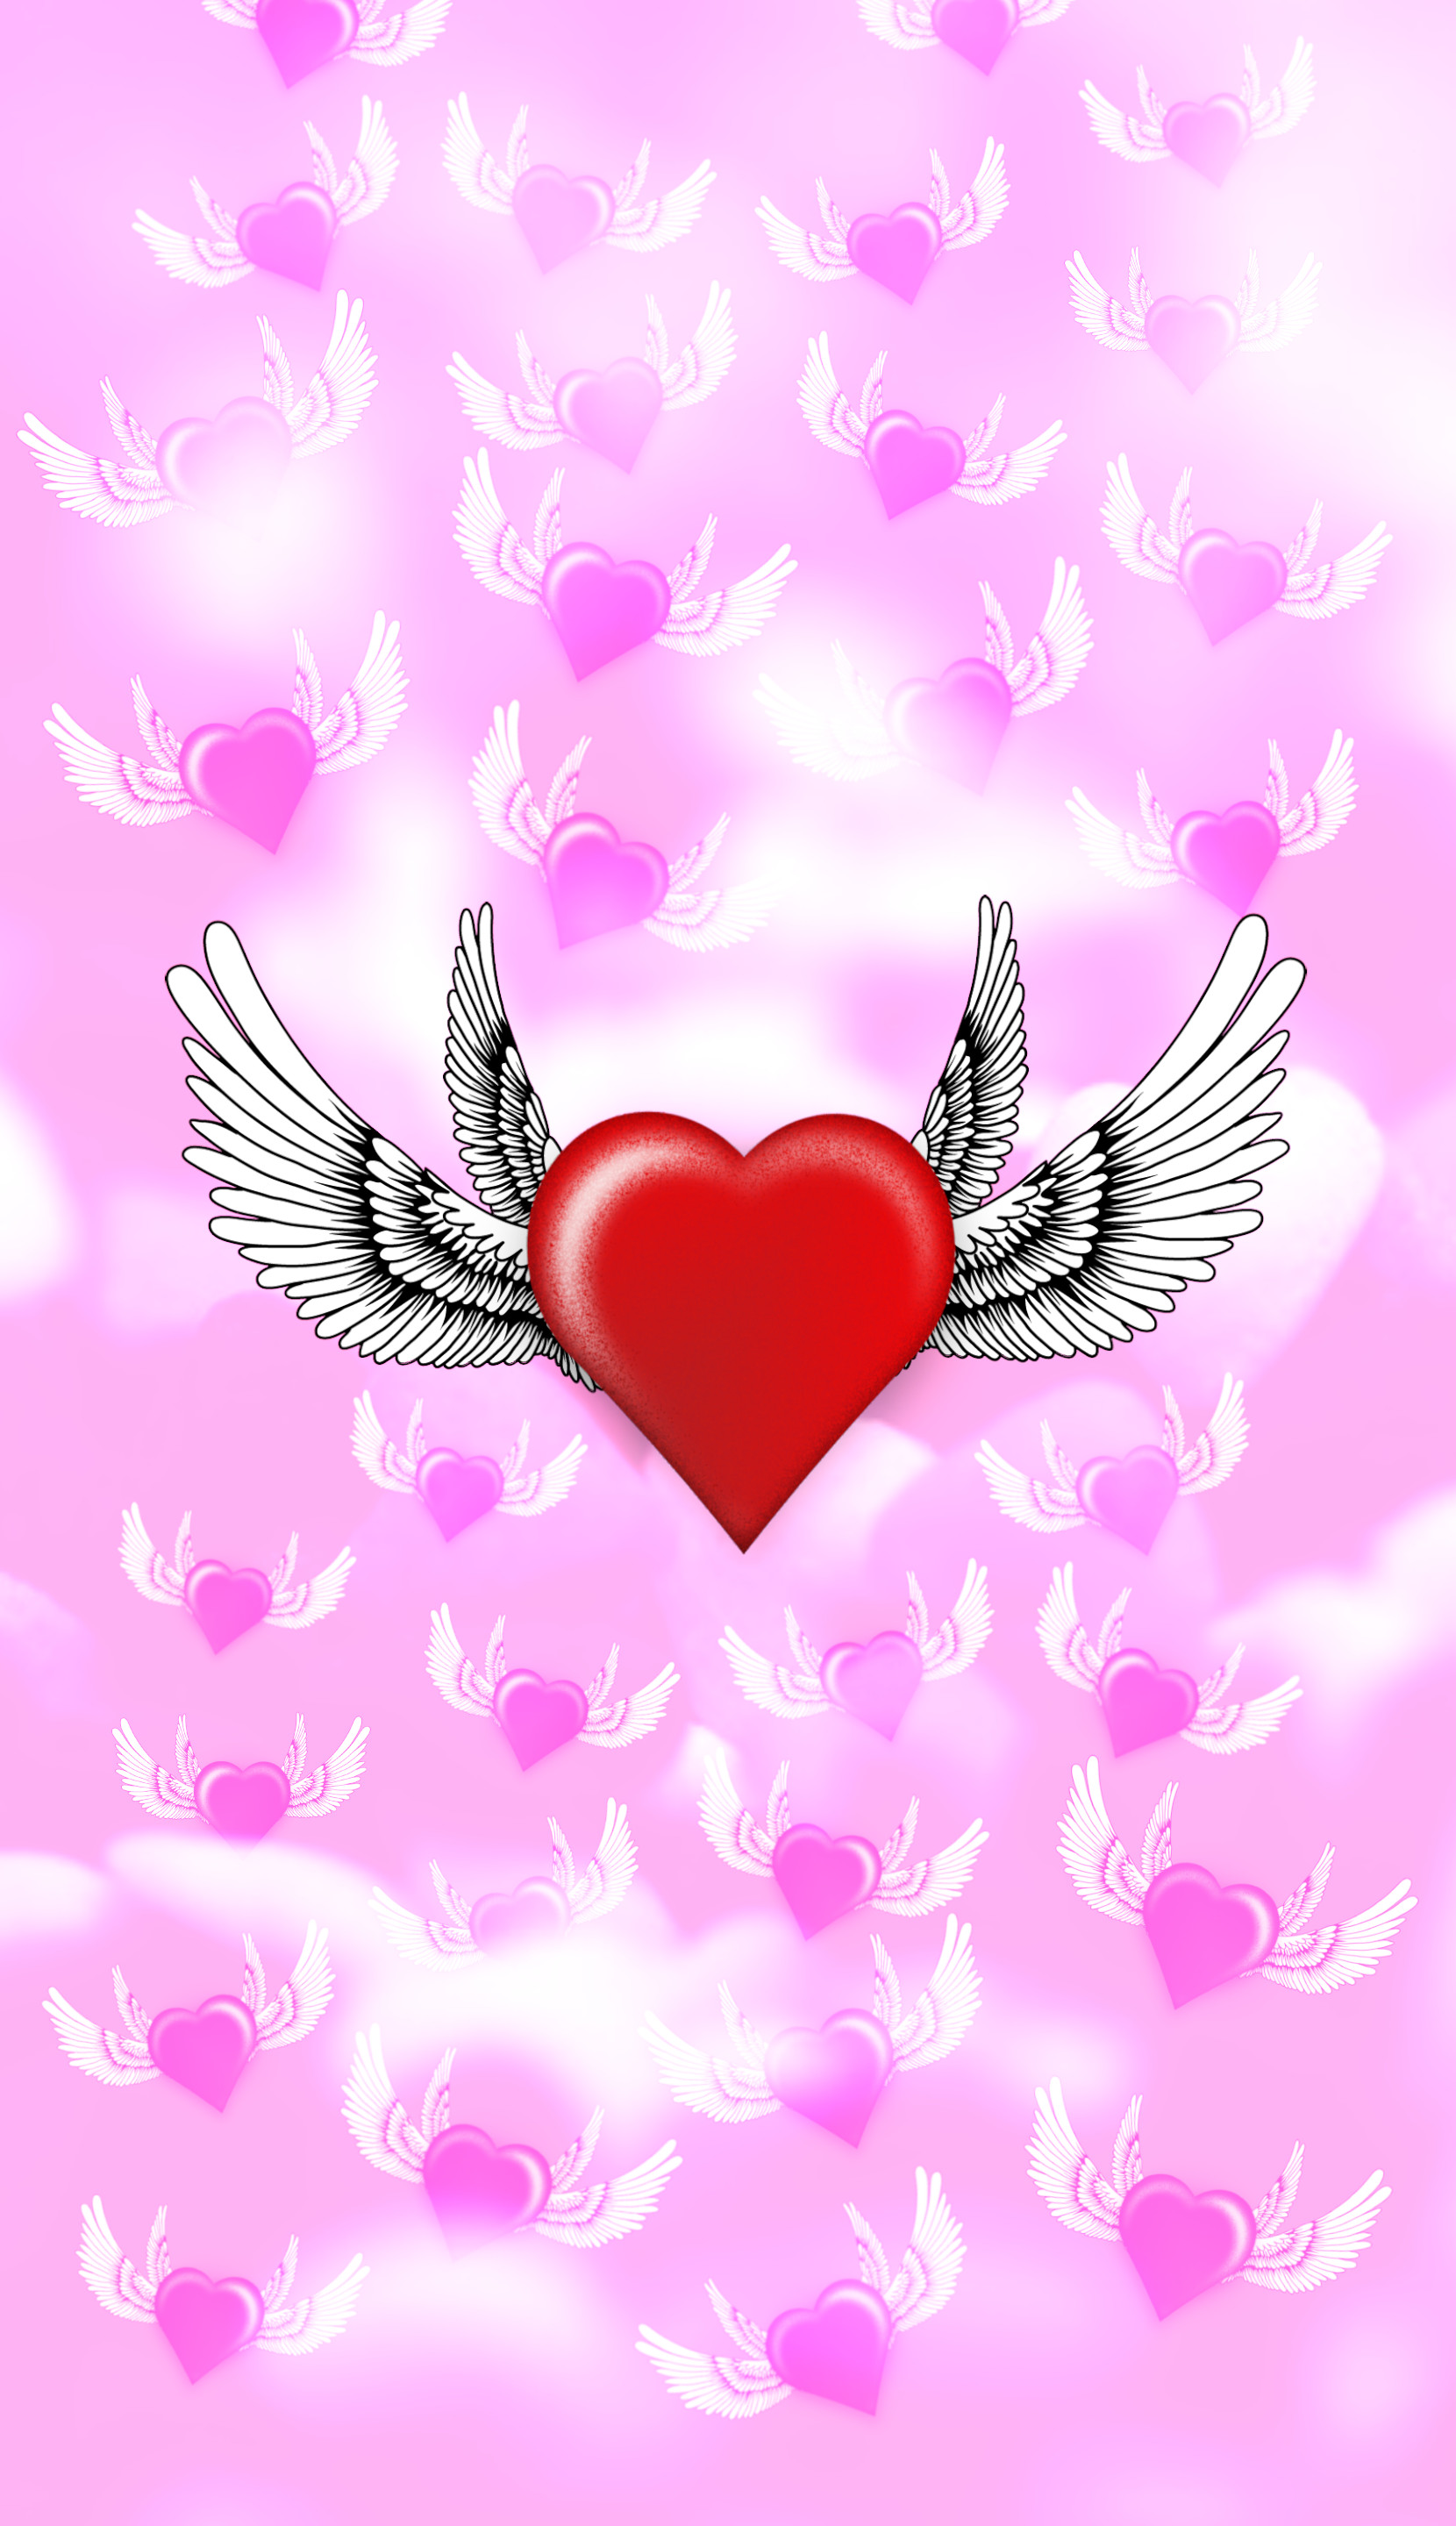 Heart with Wings